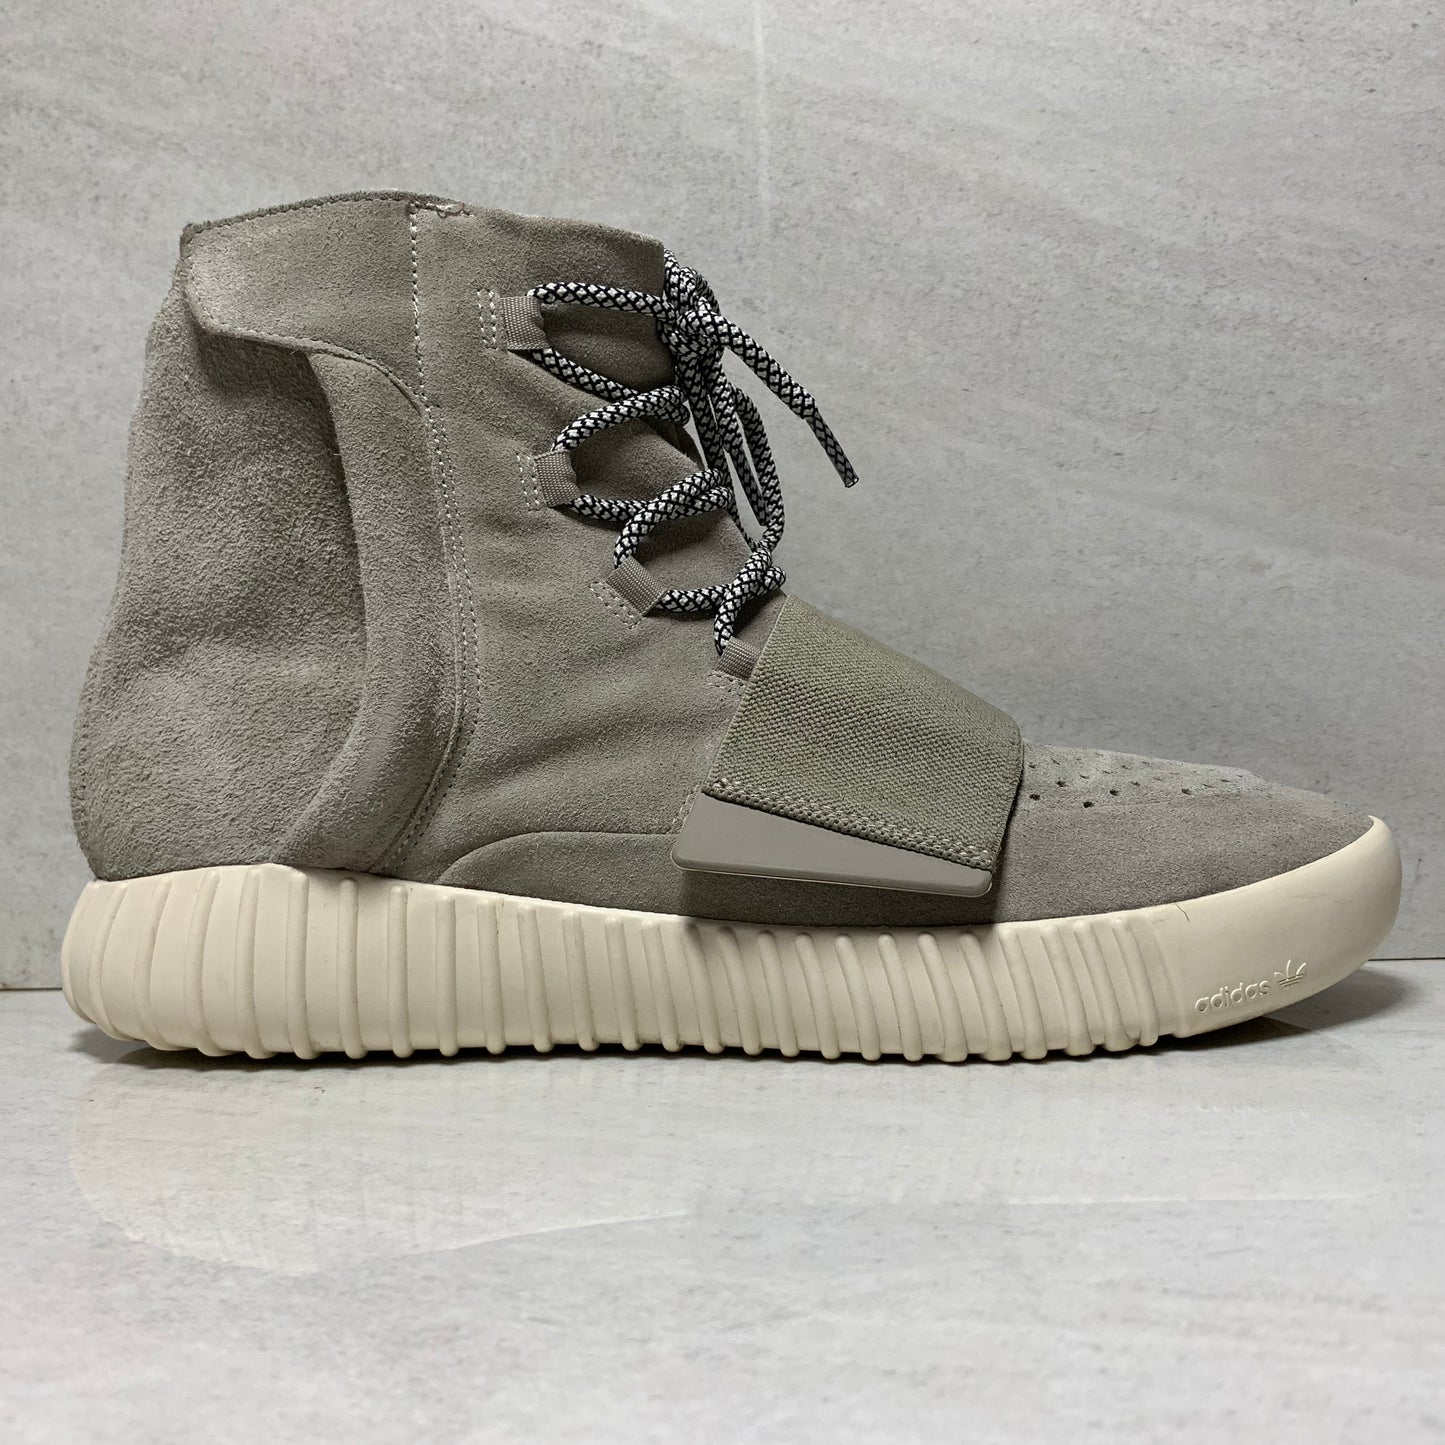 Adidas Yeezy 750 Boost OG Gris/Marron Clair Taille 12